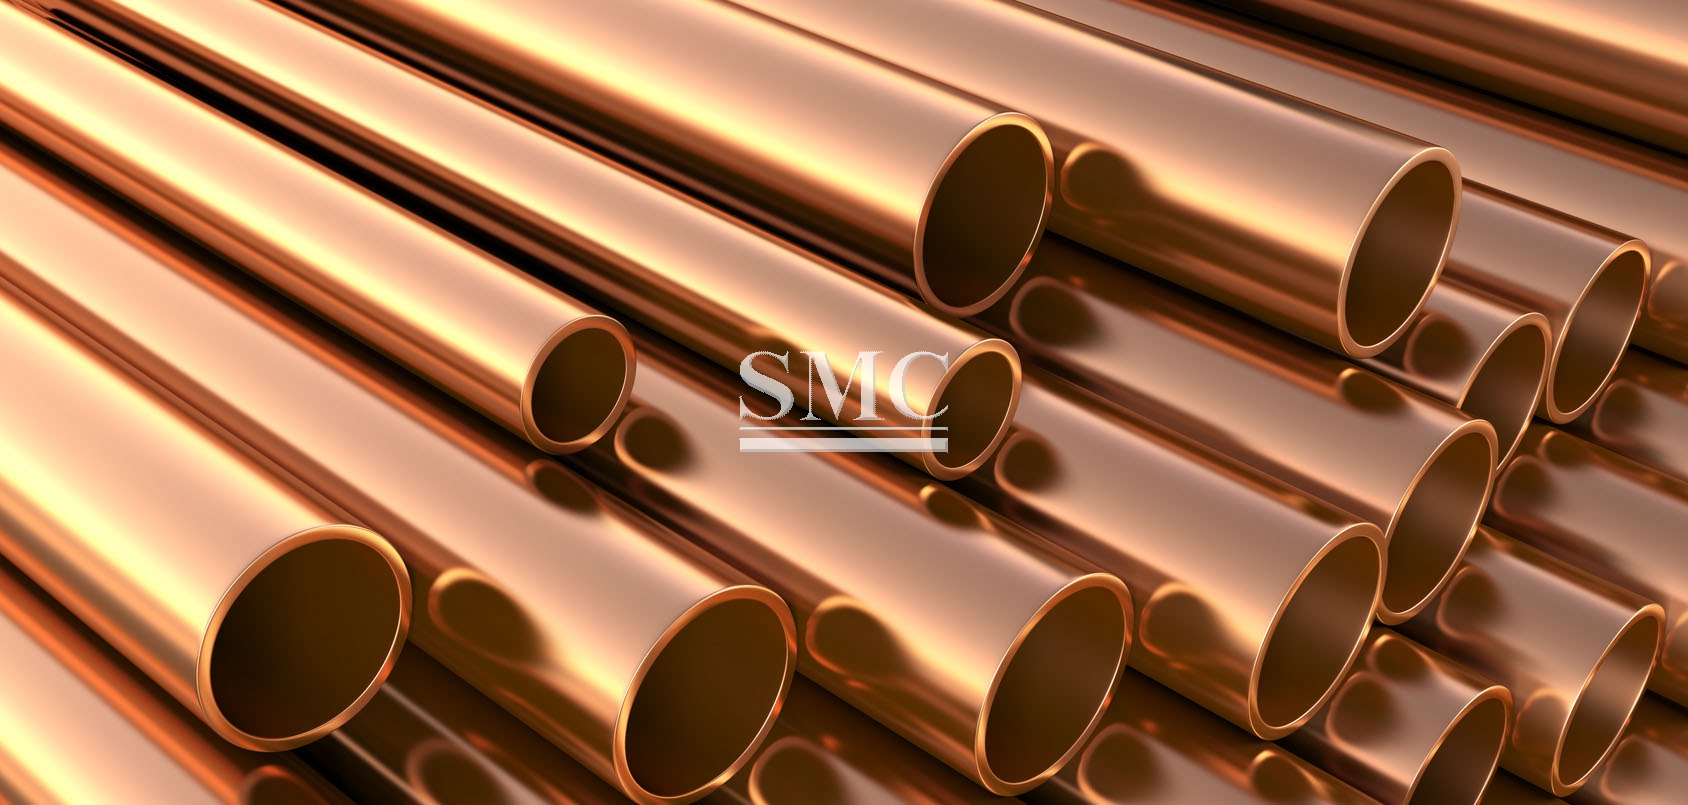 Copper benefits for using copper tubing for mechanical systems